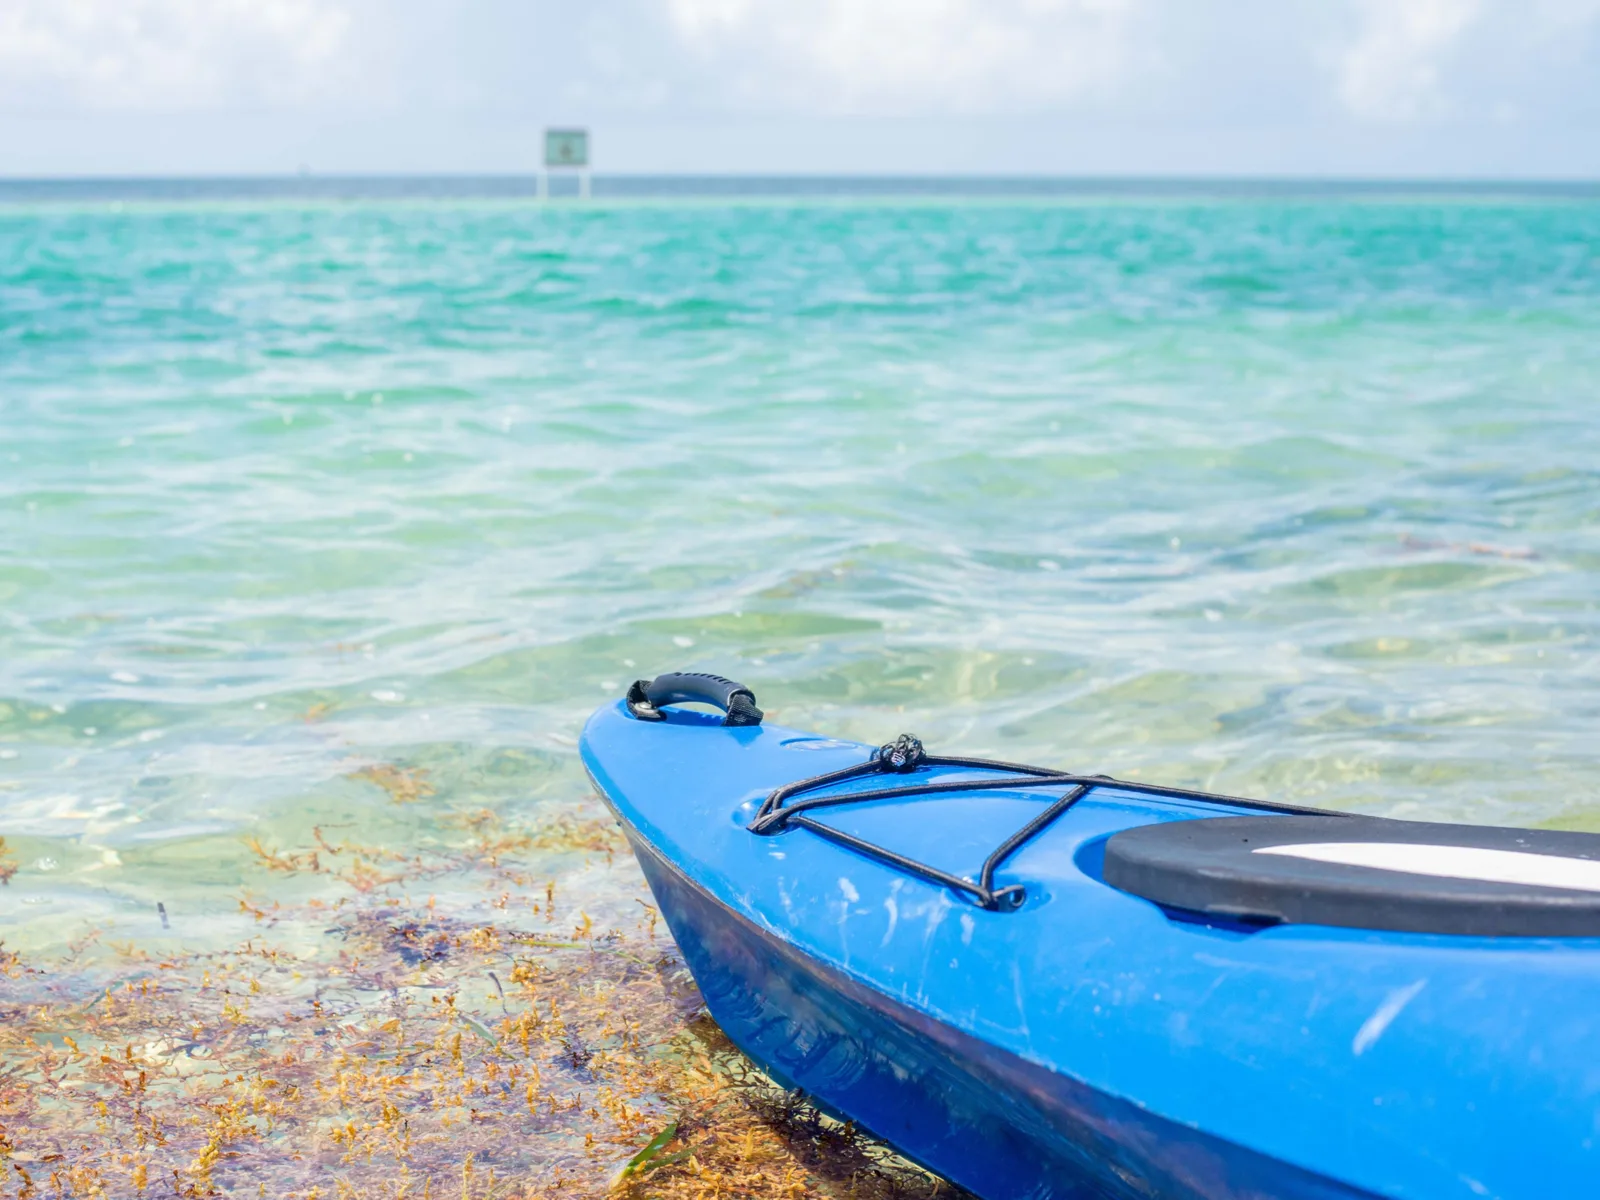 Islamorada beach with a blue kayak on the water for a piece on the cheapest time to visit the Florida Keys